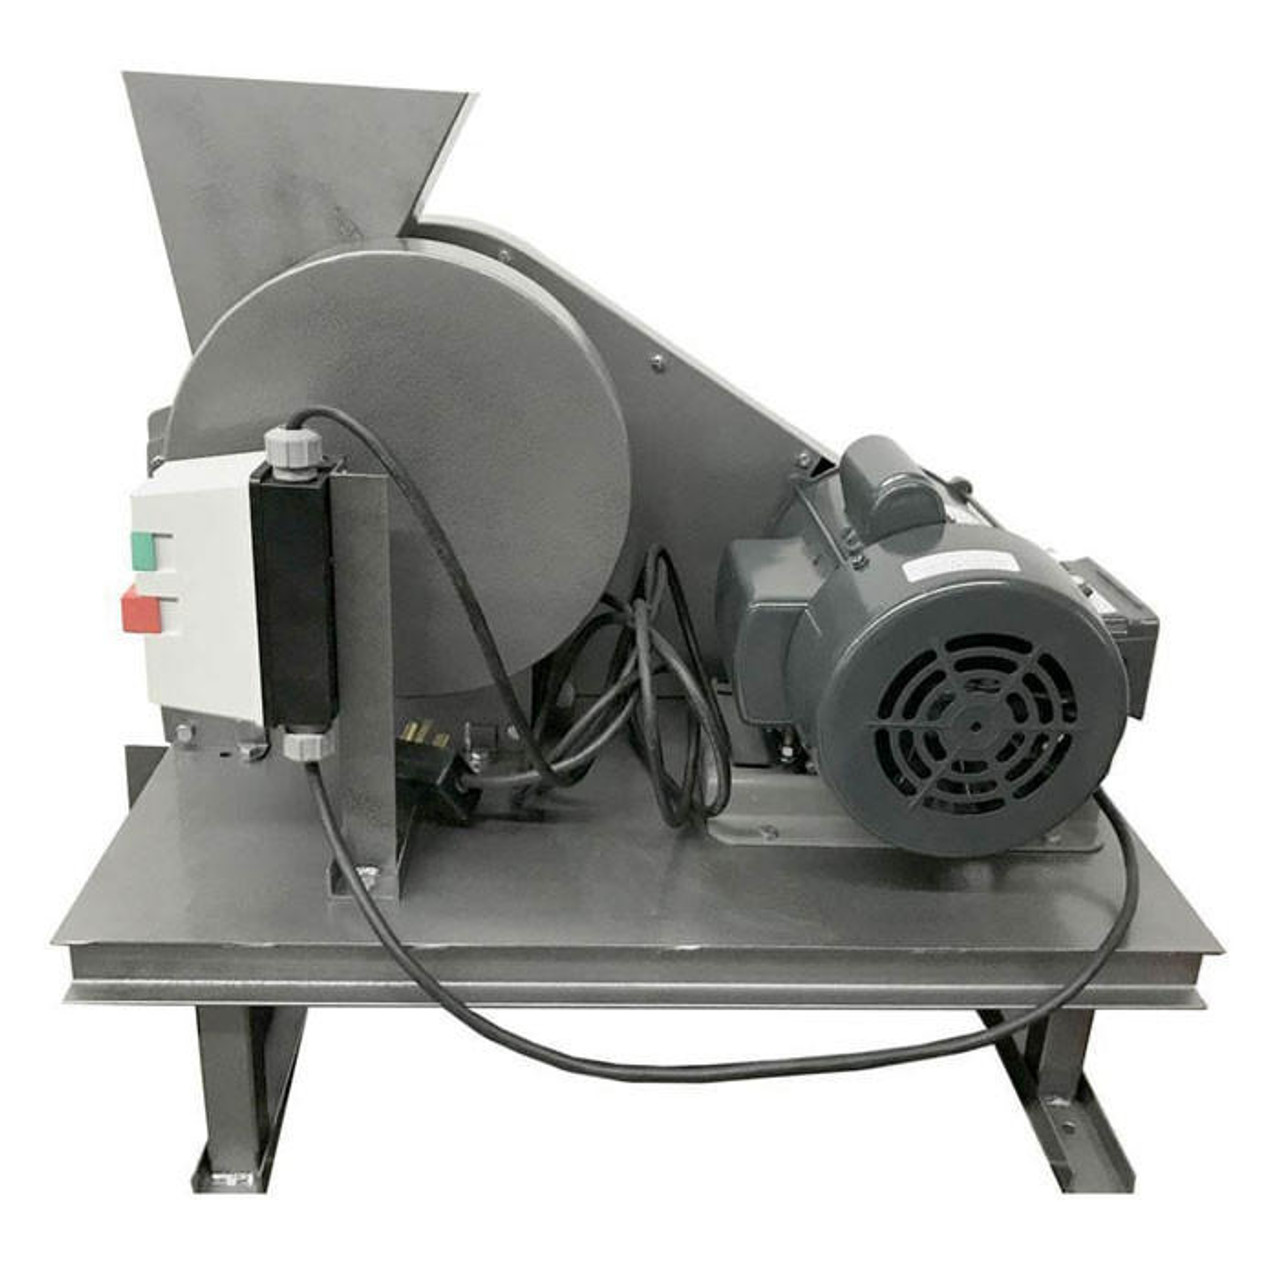 A compact jaw crusher with a screeners for transport